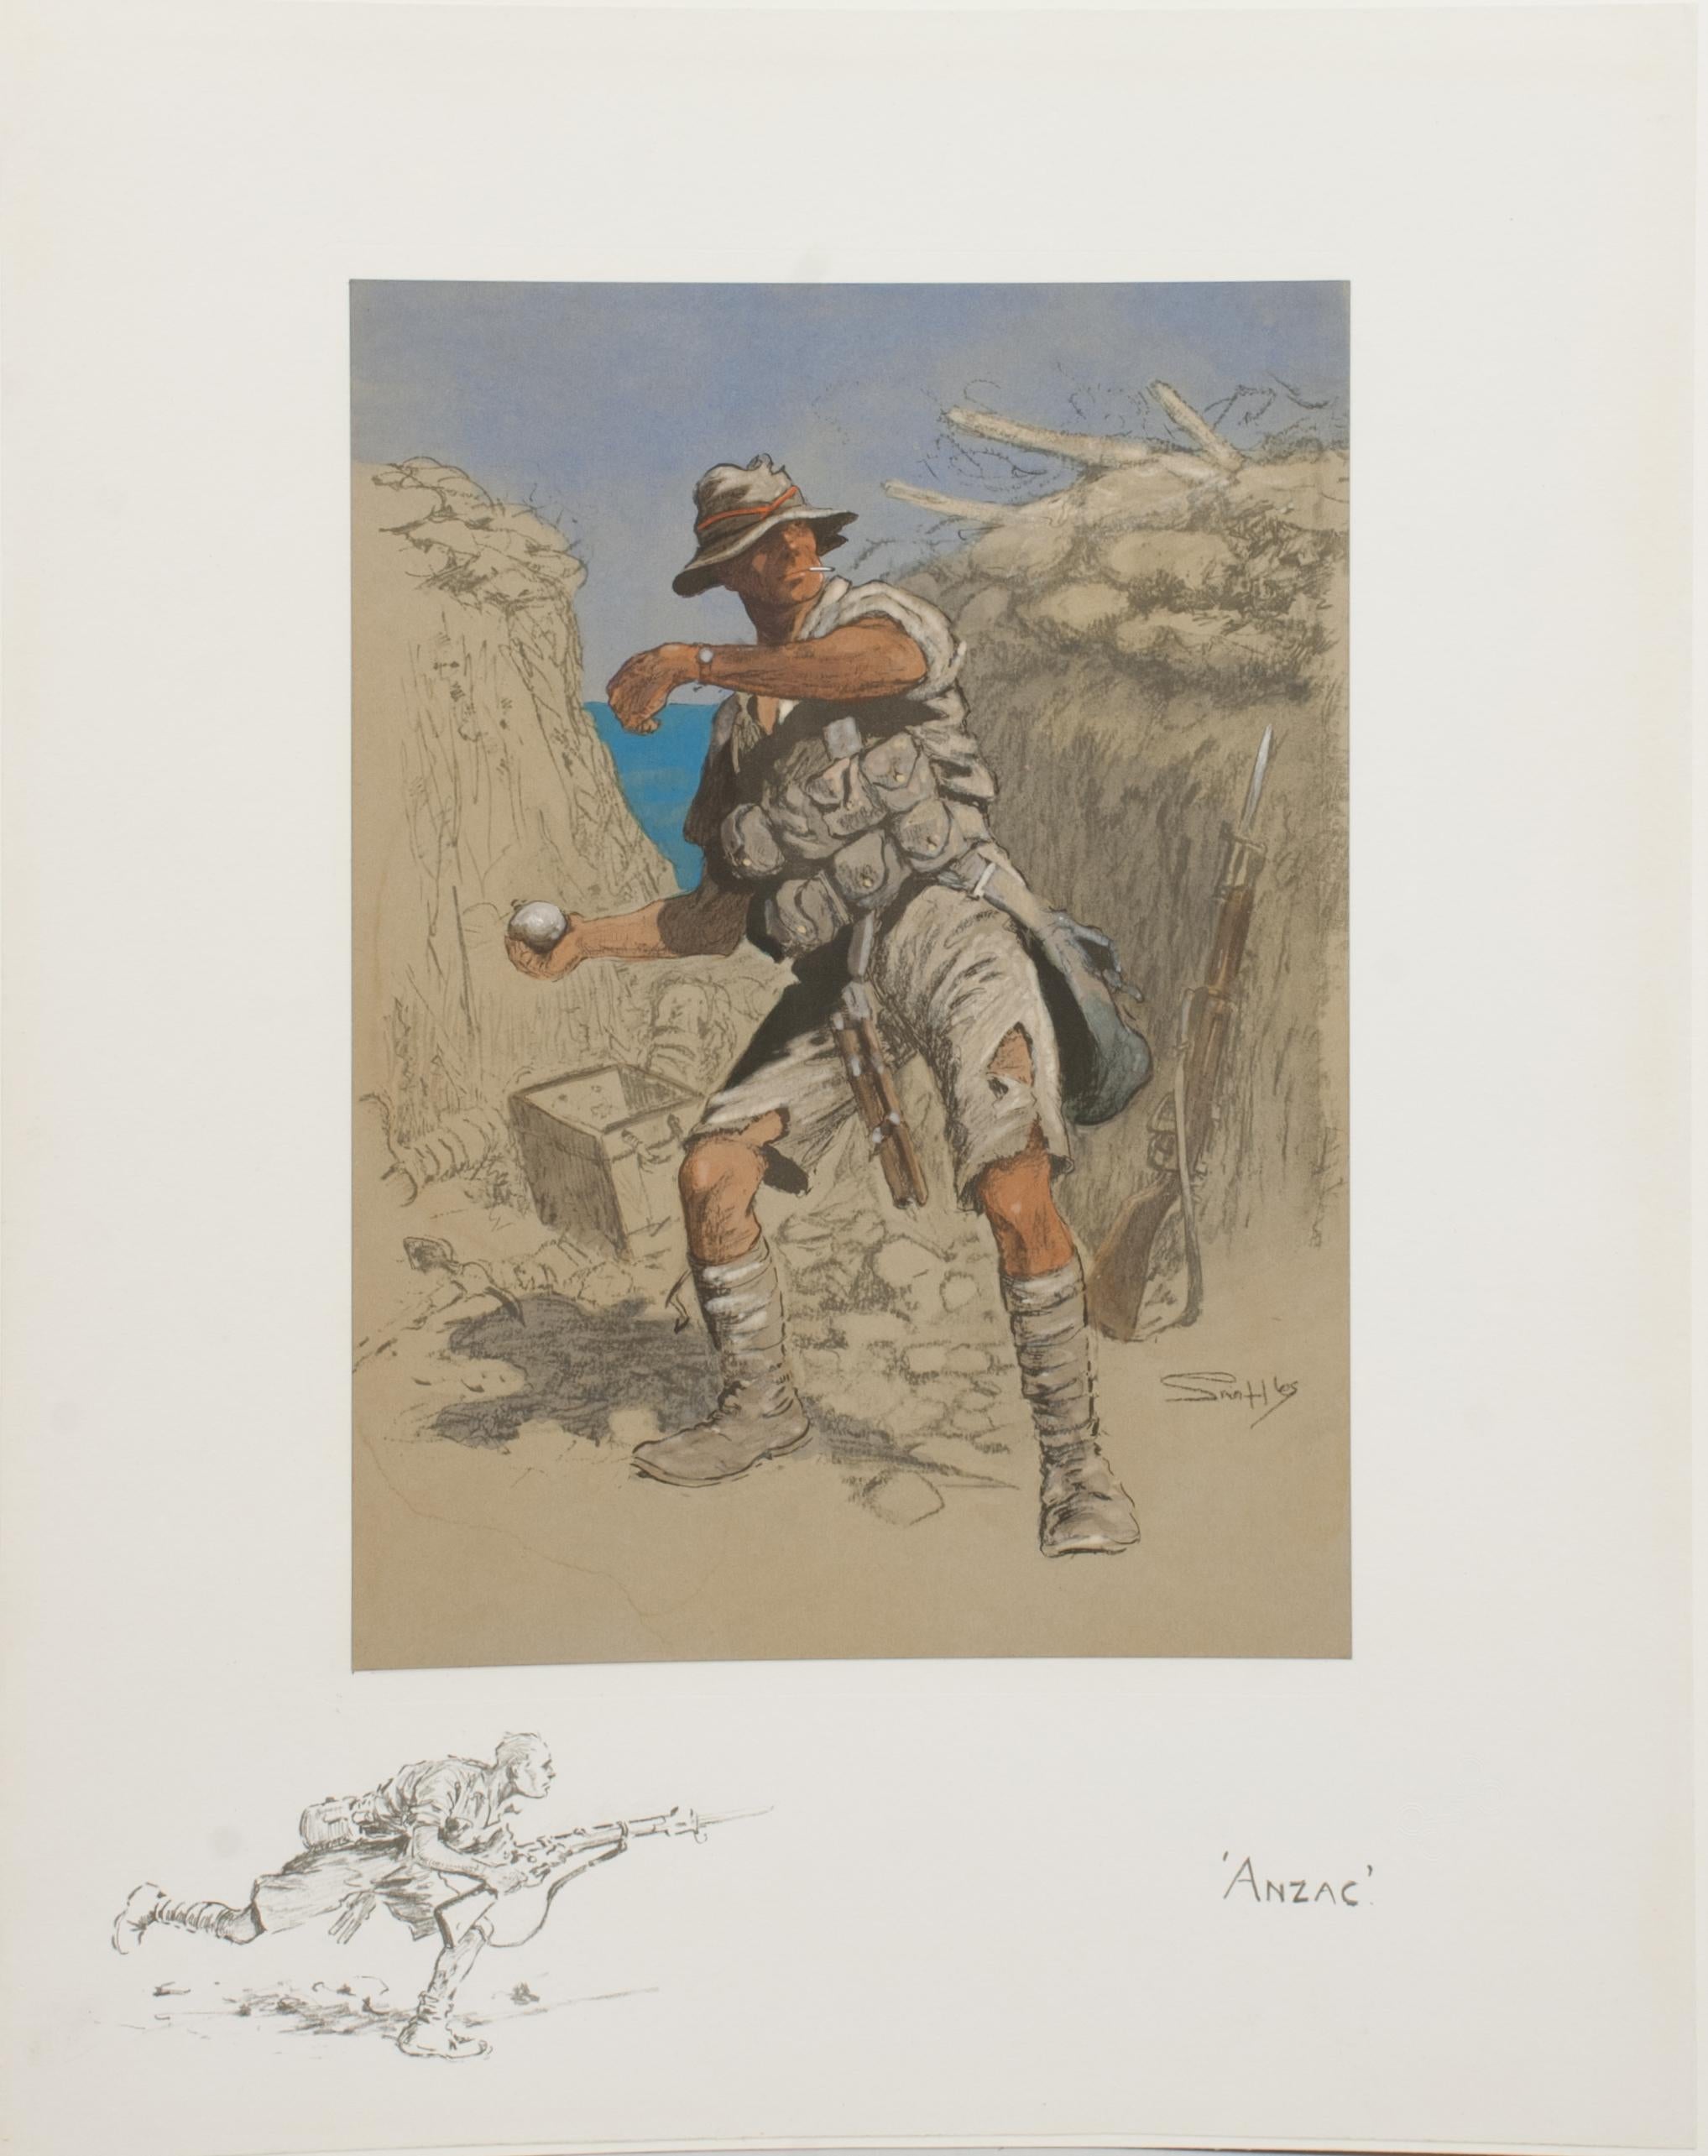 Vintage Snaffles WWI Military Print, Anzac.
A good Snaffles WWI military print entitled 'Anzac'. The main center colour-piece image is mounted onto the printed remarque board. The Snaffles hand coloured lithograph shows an Australian soldier in the